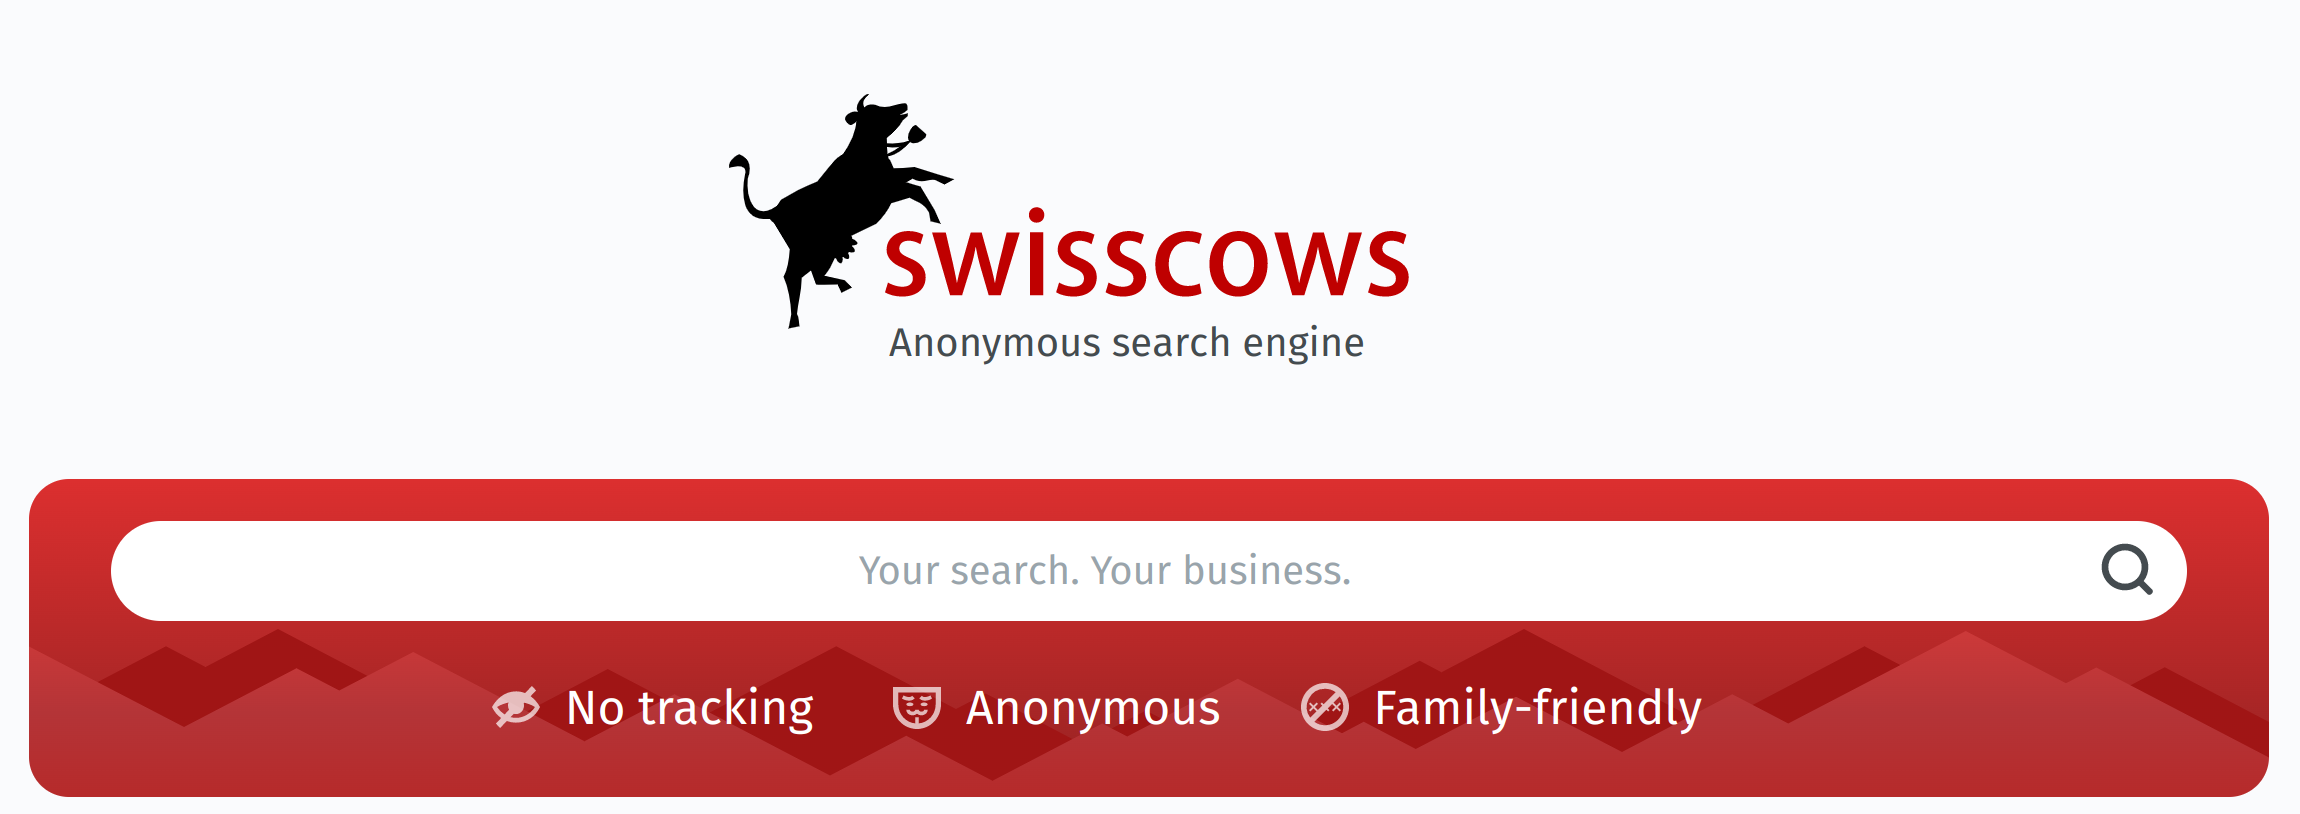 SwissCows search engine